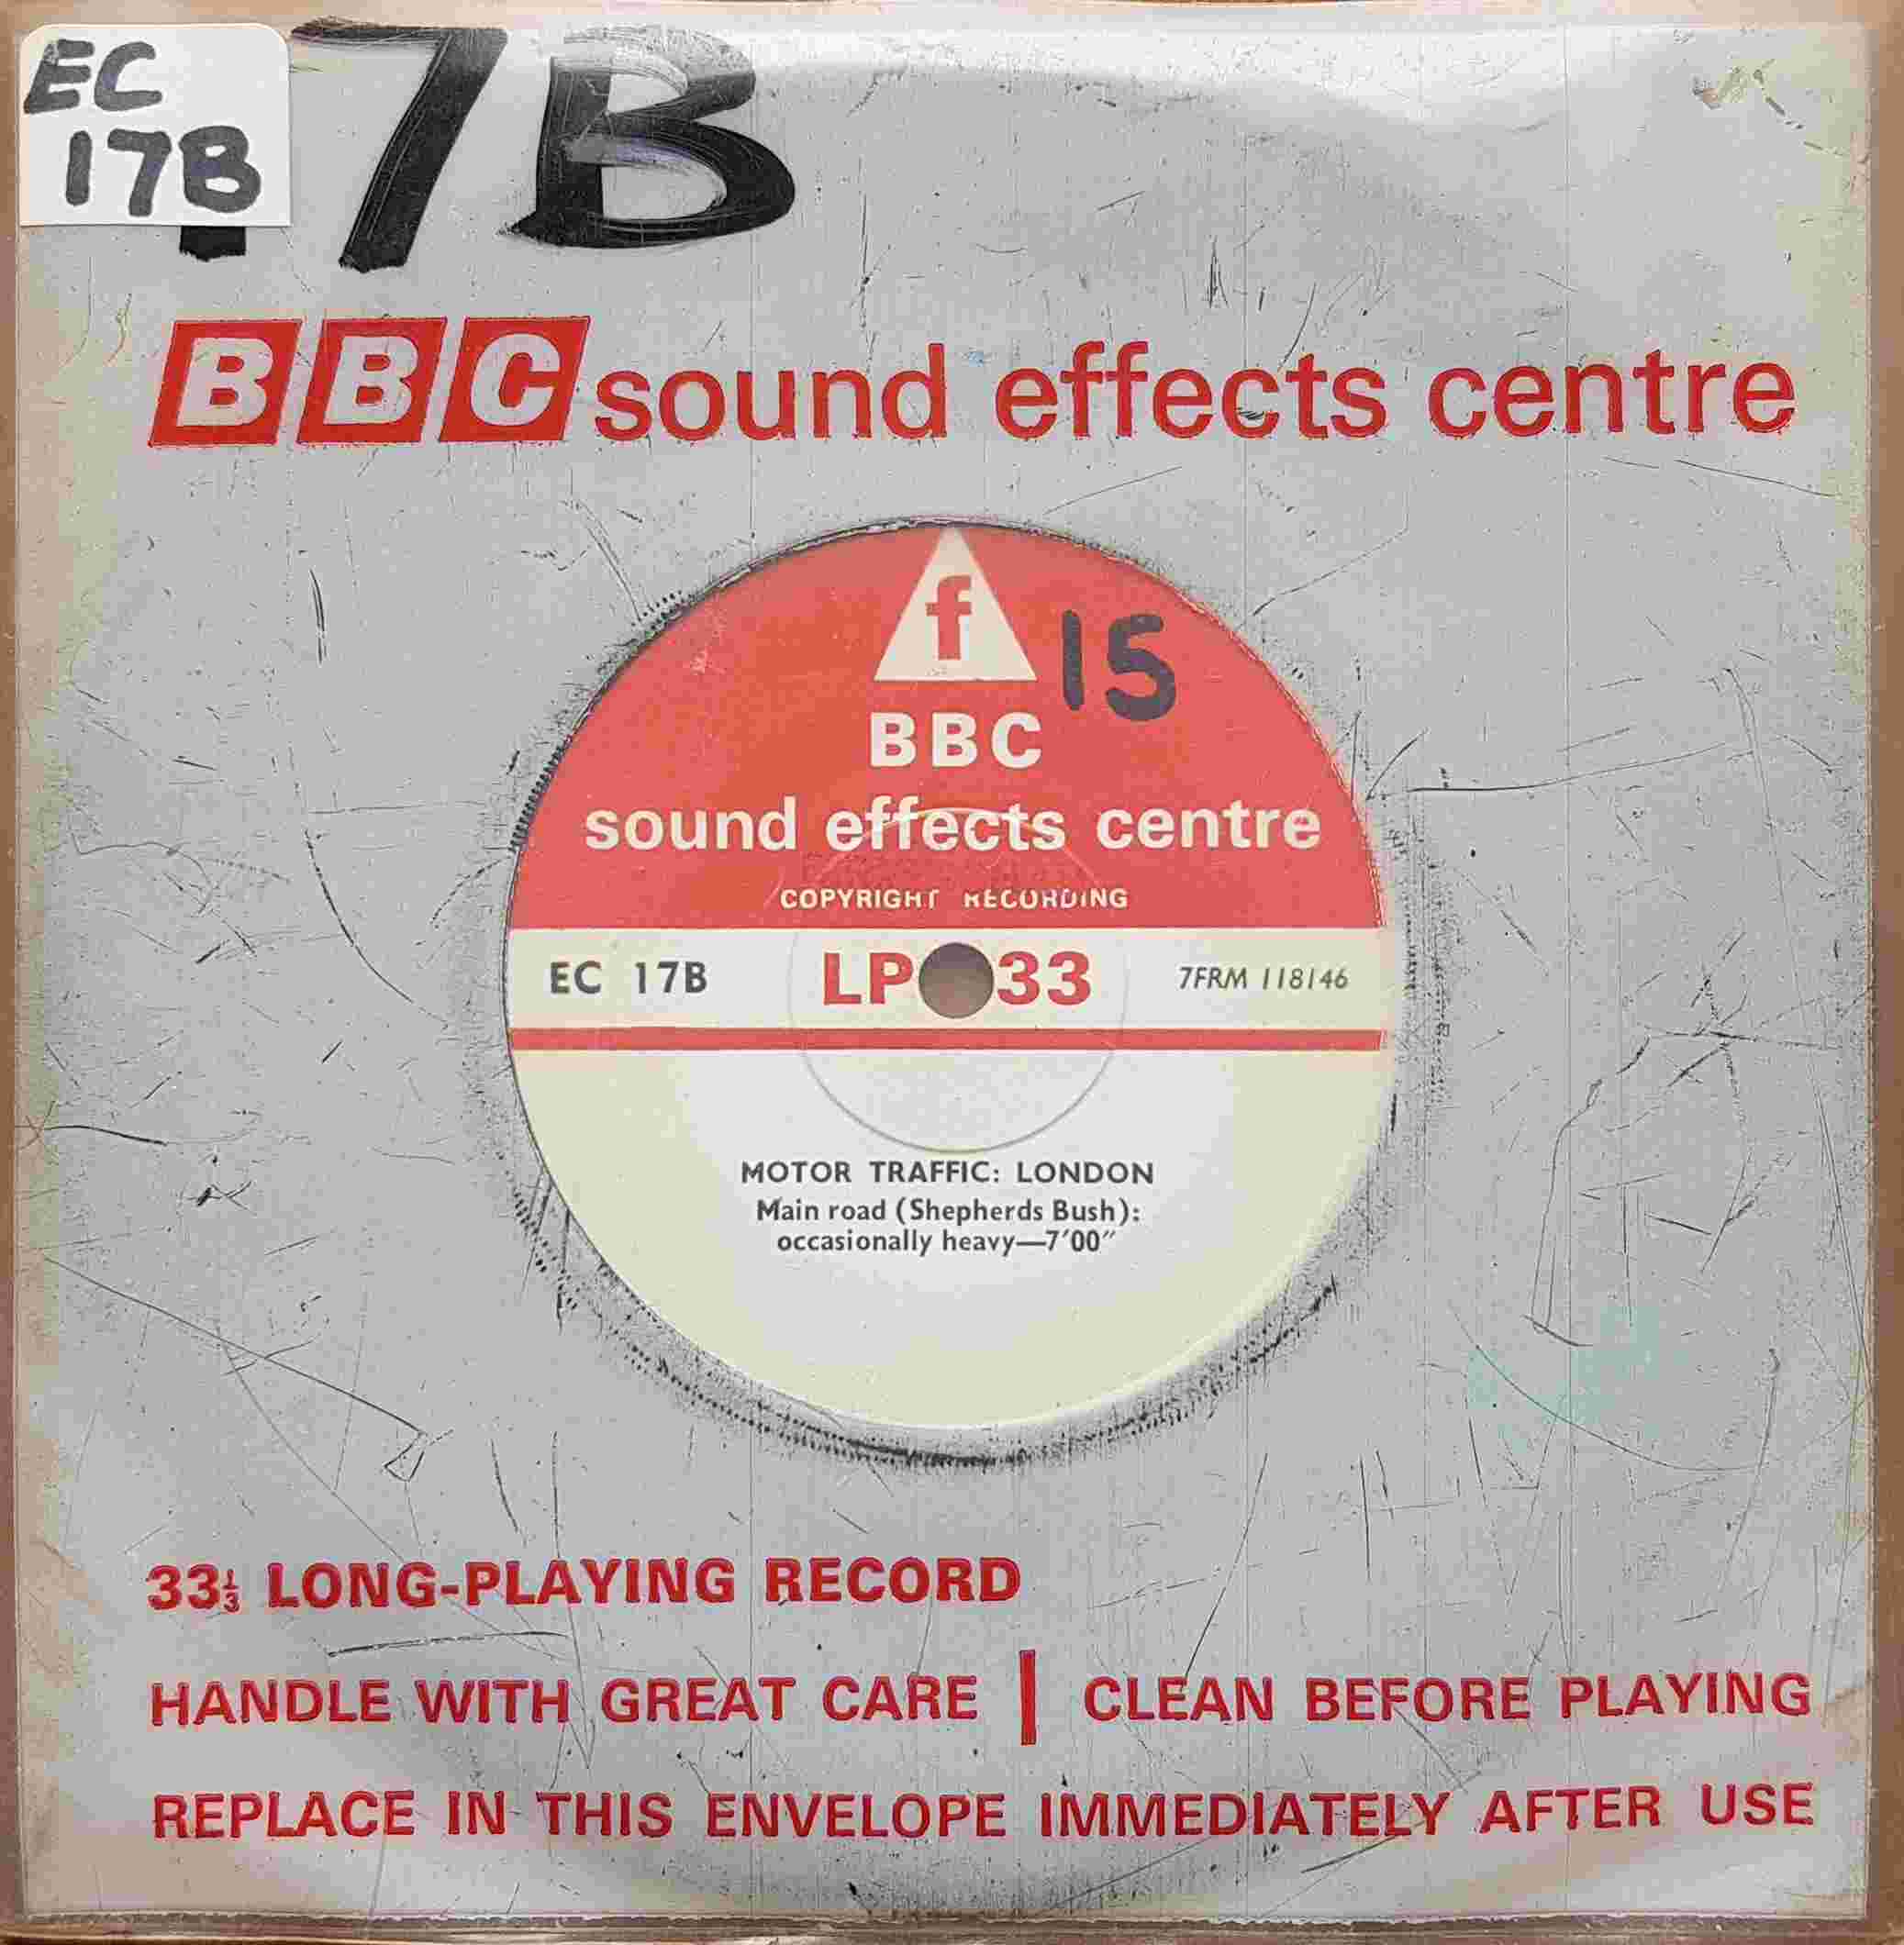 Picture of EC 17B Motor traffic: London by artist Not registered from the BBC records and Tapes library